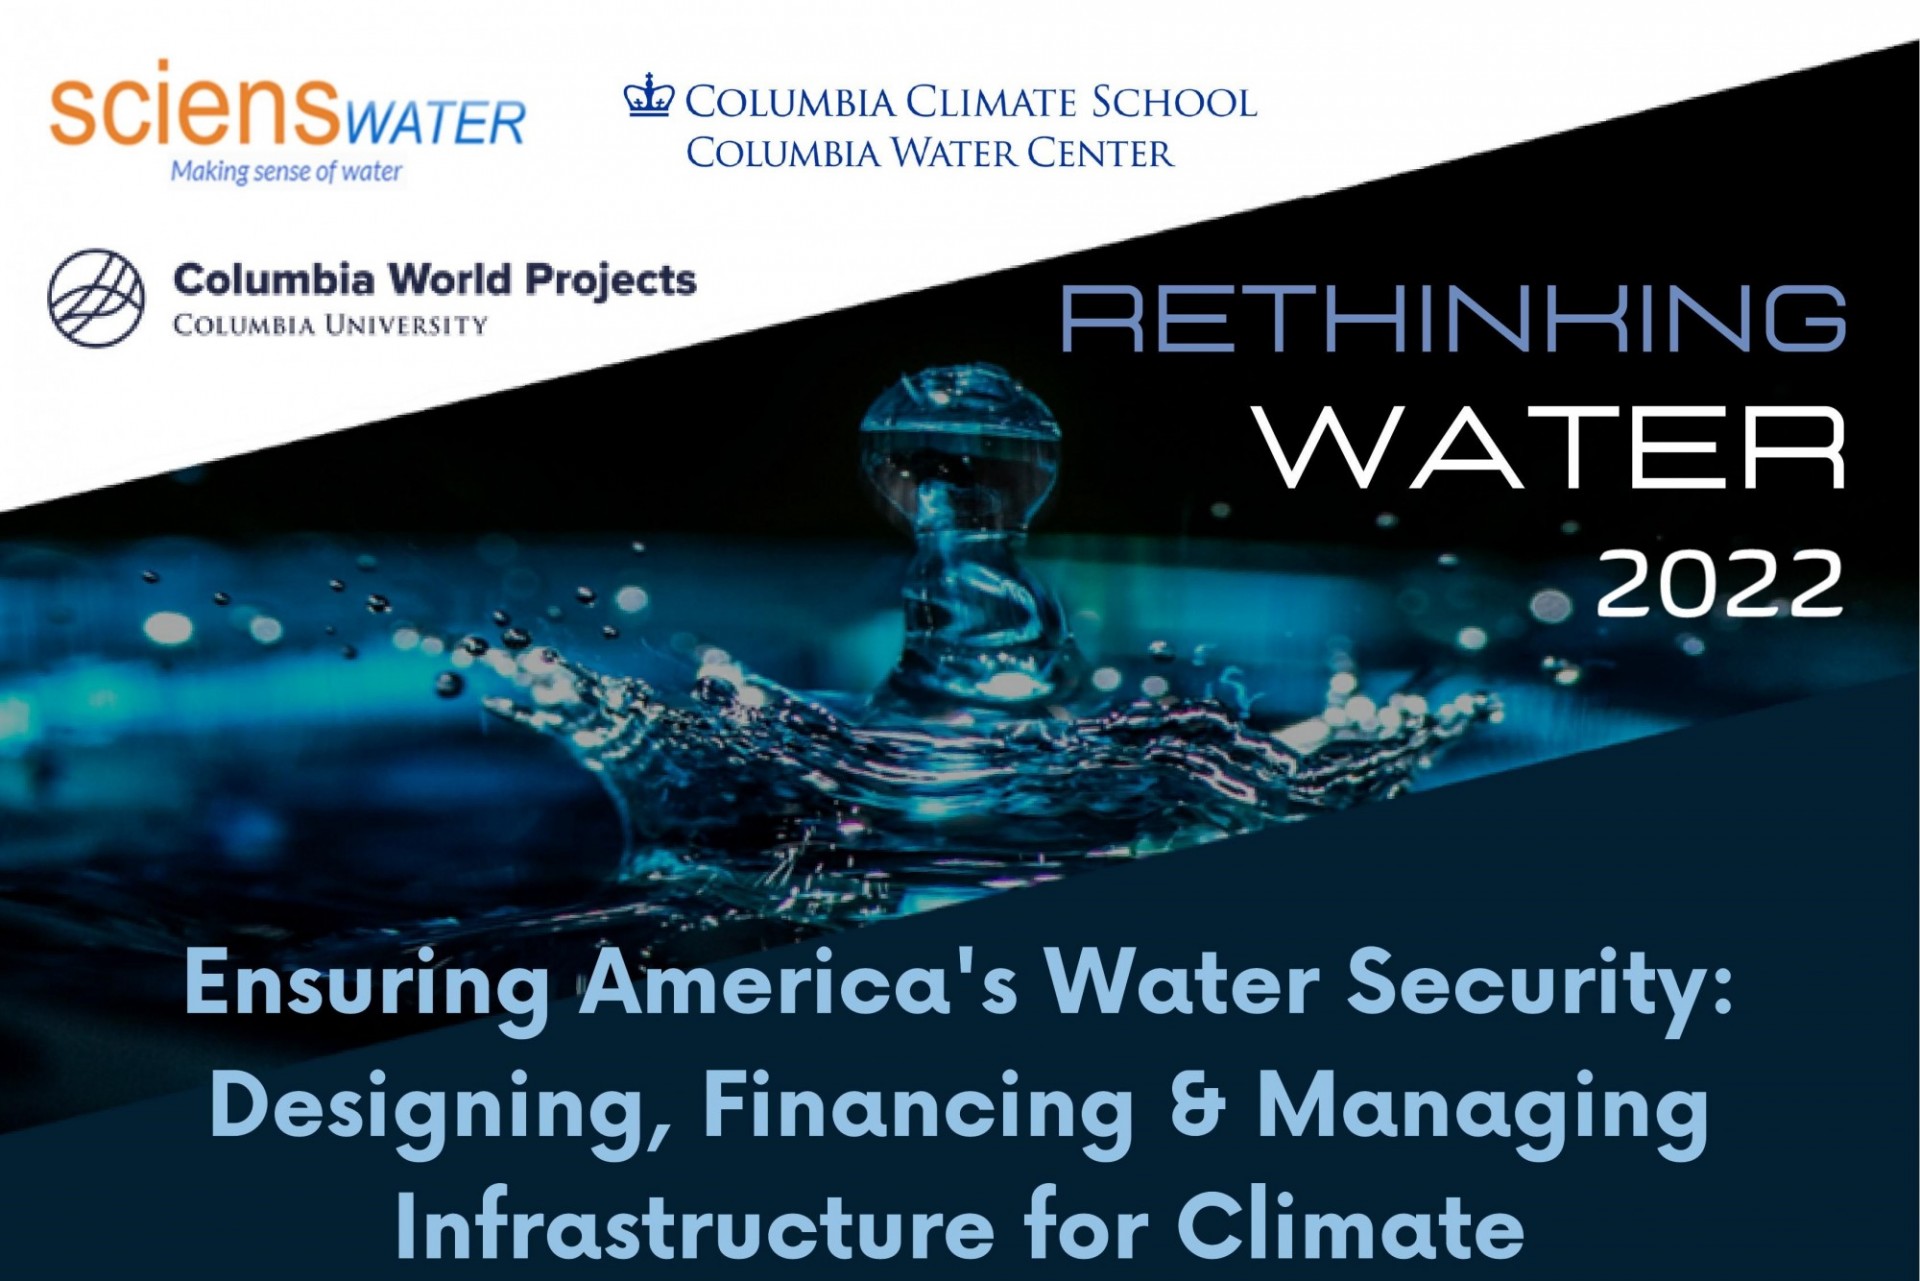 Rethinking Water 2022 Hosted by Sciens Water, Columbia Water Center, and Columbia World Projects